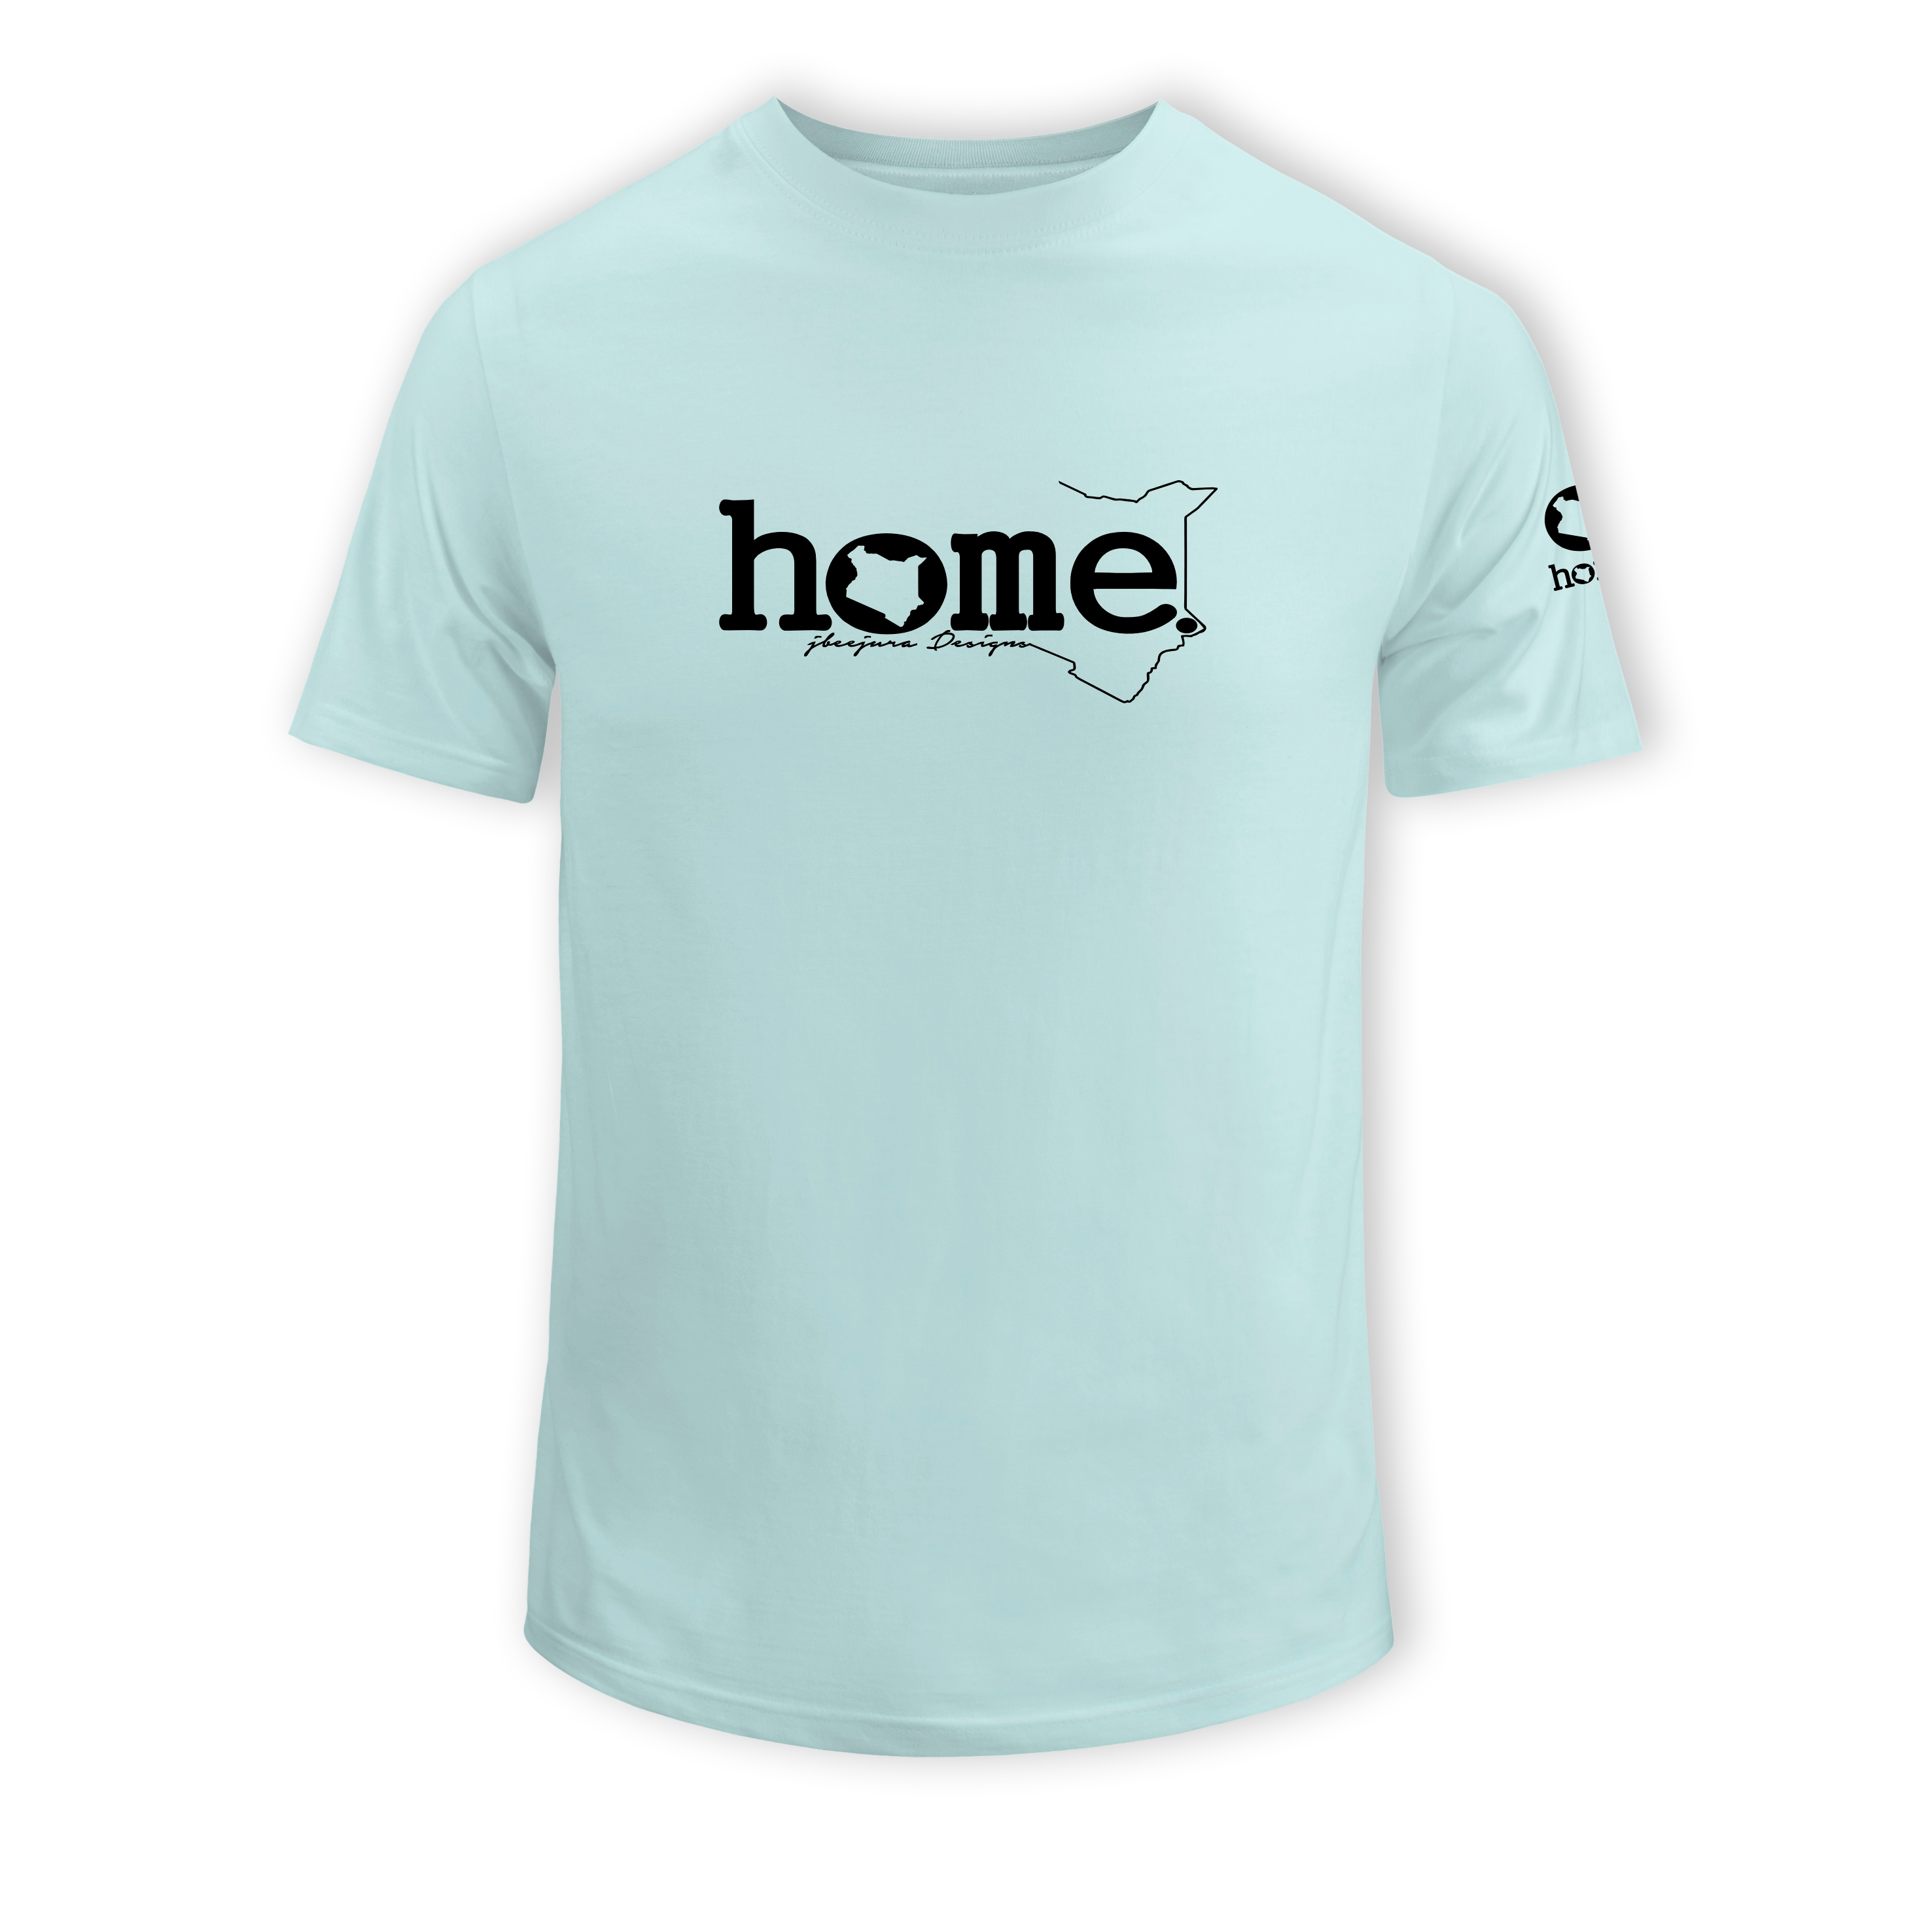 home_254 KIDS SHORT-SLEEVED MISTY BLUE T-SHIRT WITH A BLACK CLASSIC WORDS PRINT – COTTON PLUS FABRIC